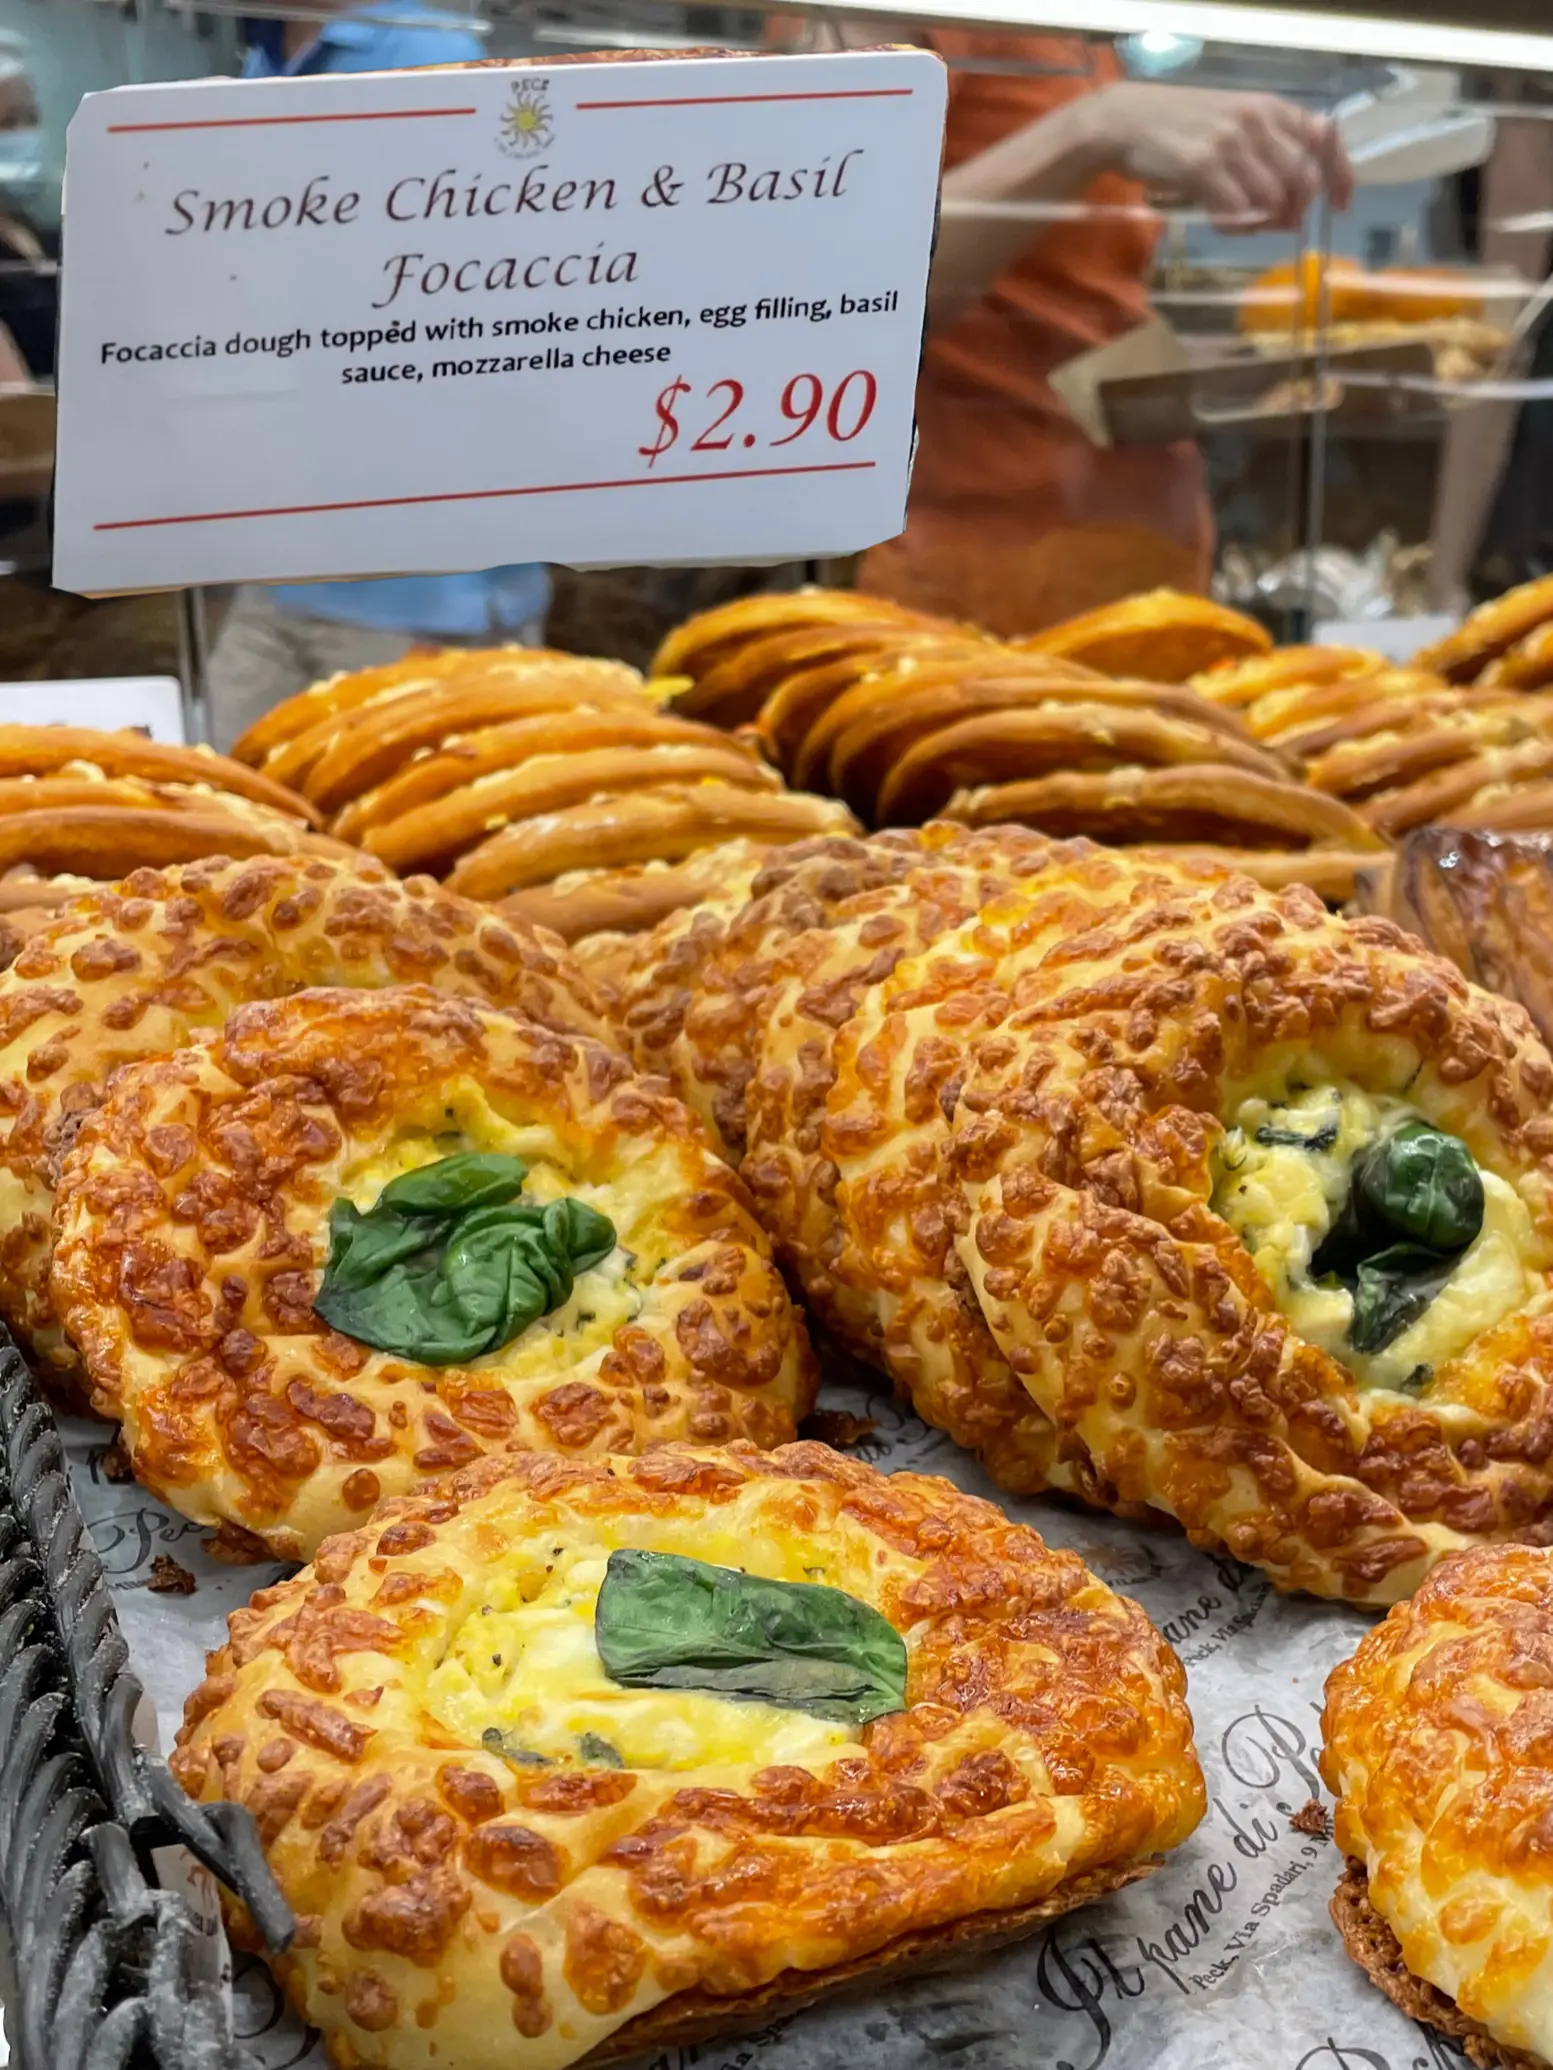 🥐 ITALIAN BAKERY IN TOWN 🇮🇹, Gallery posted by tessacxy